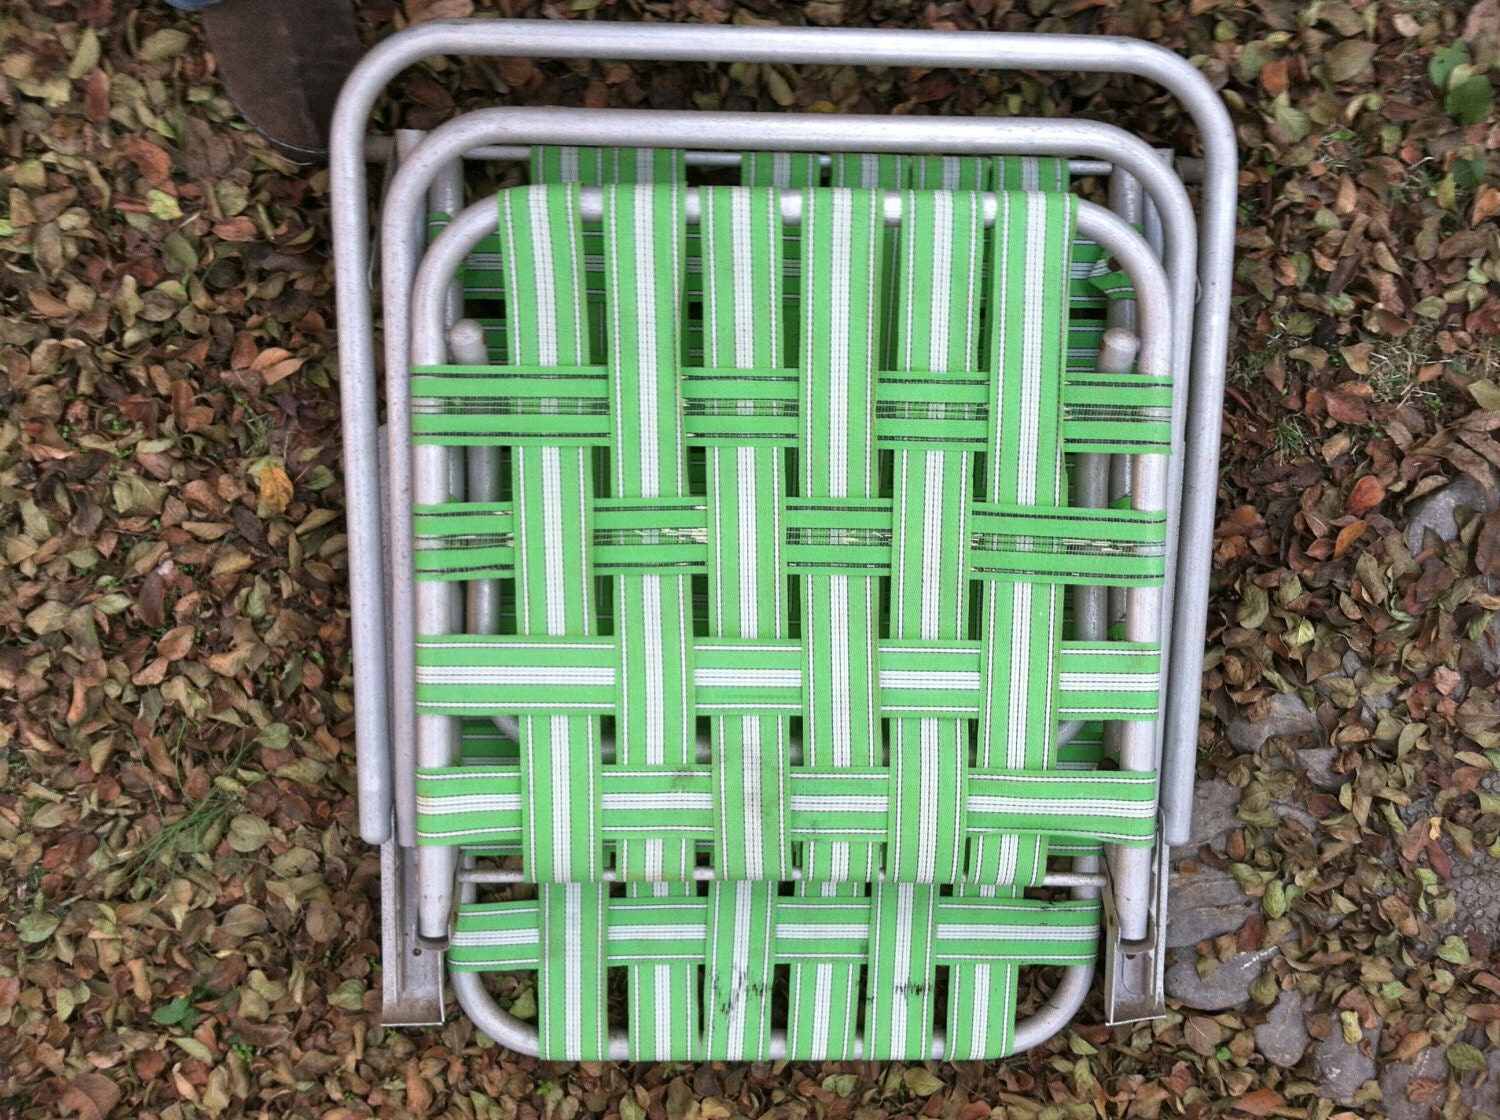 aluminum lawn chair with plastic webbing